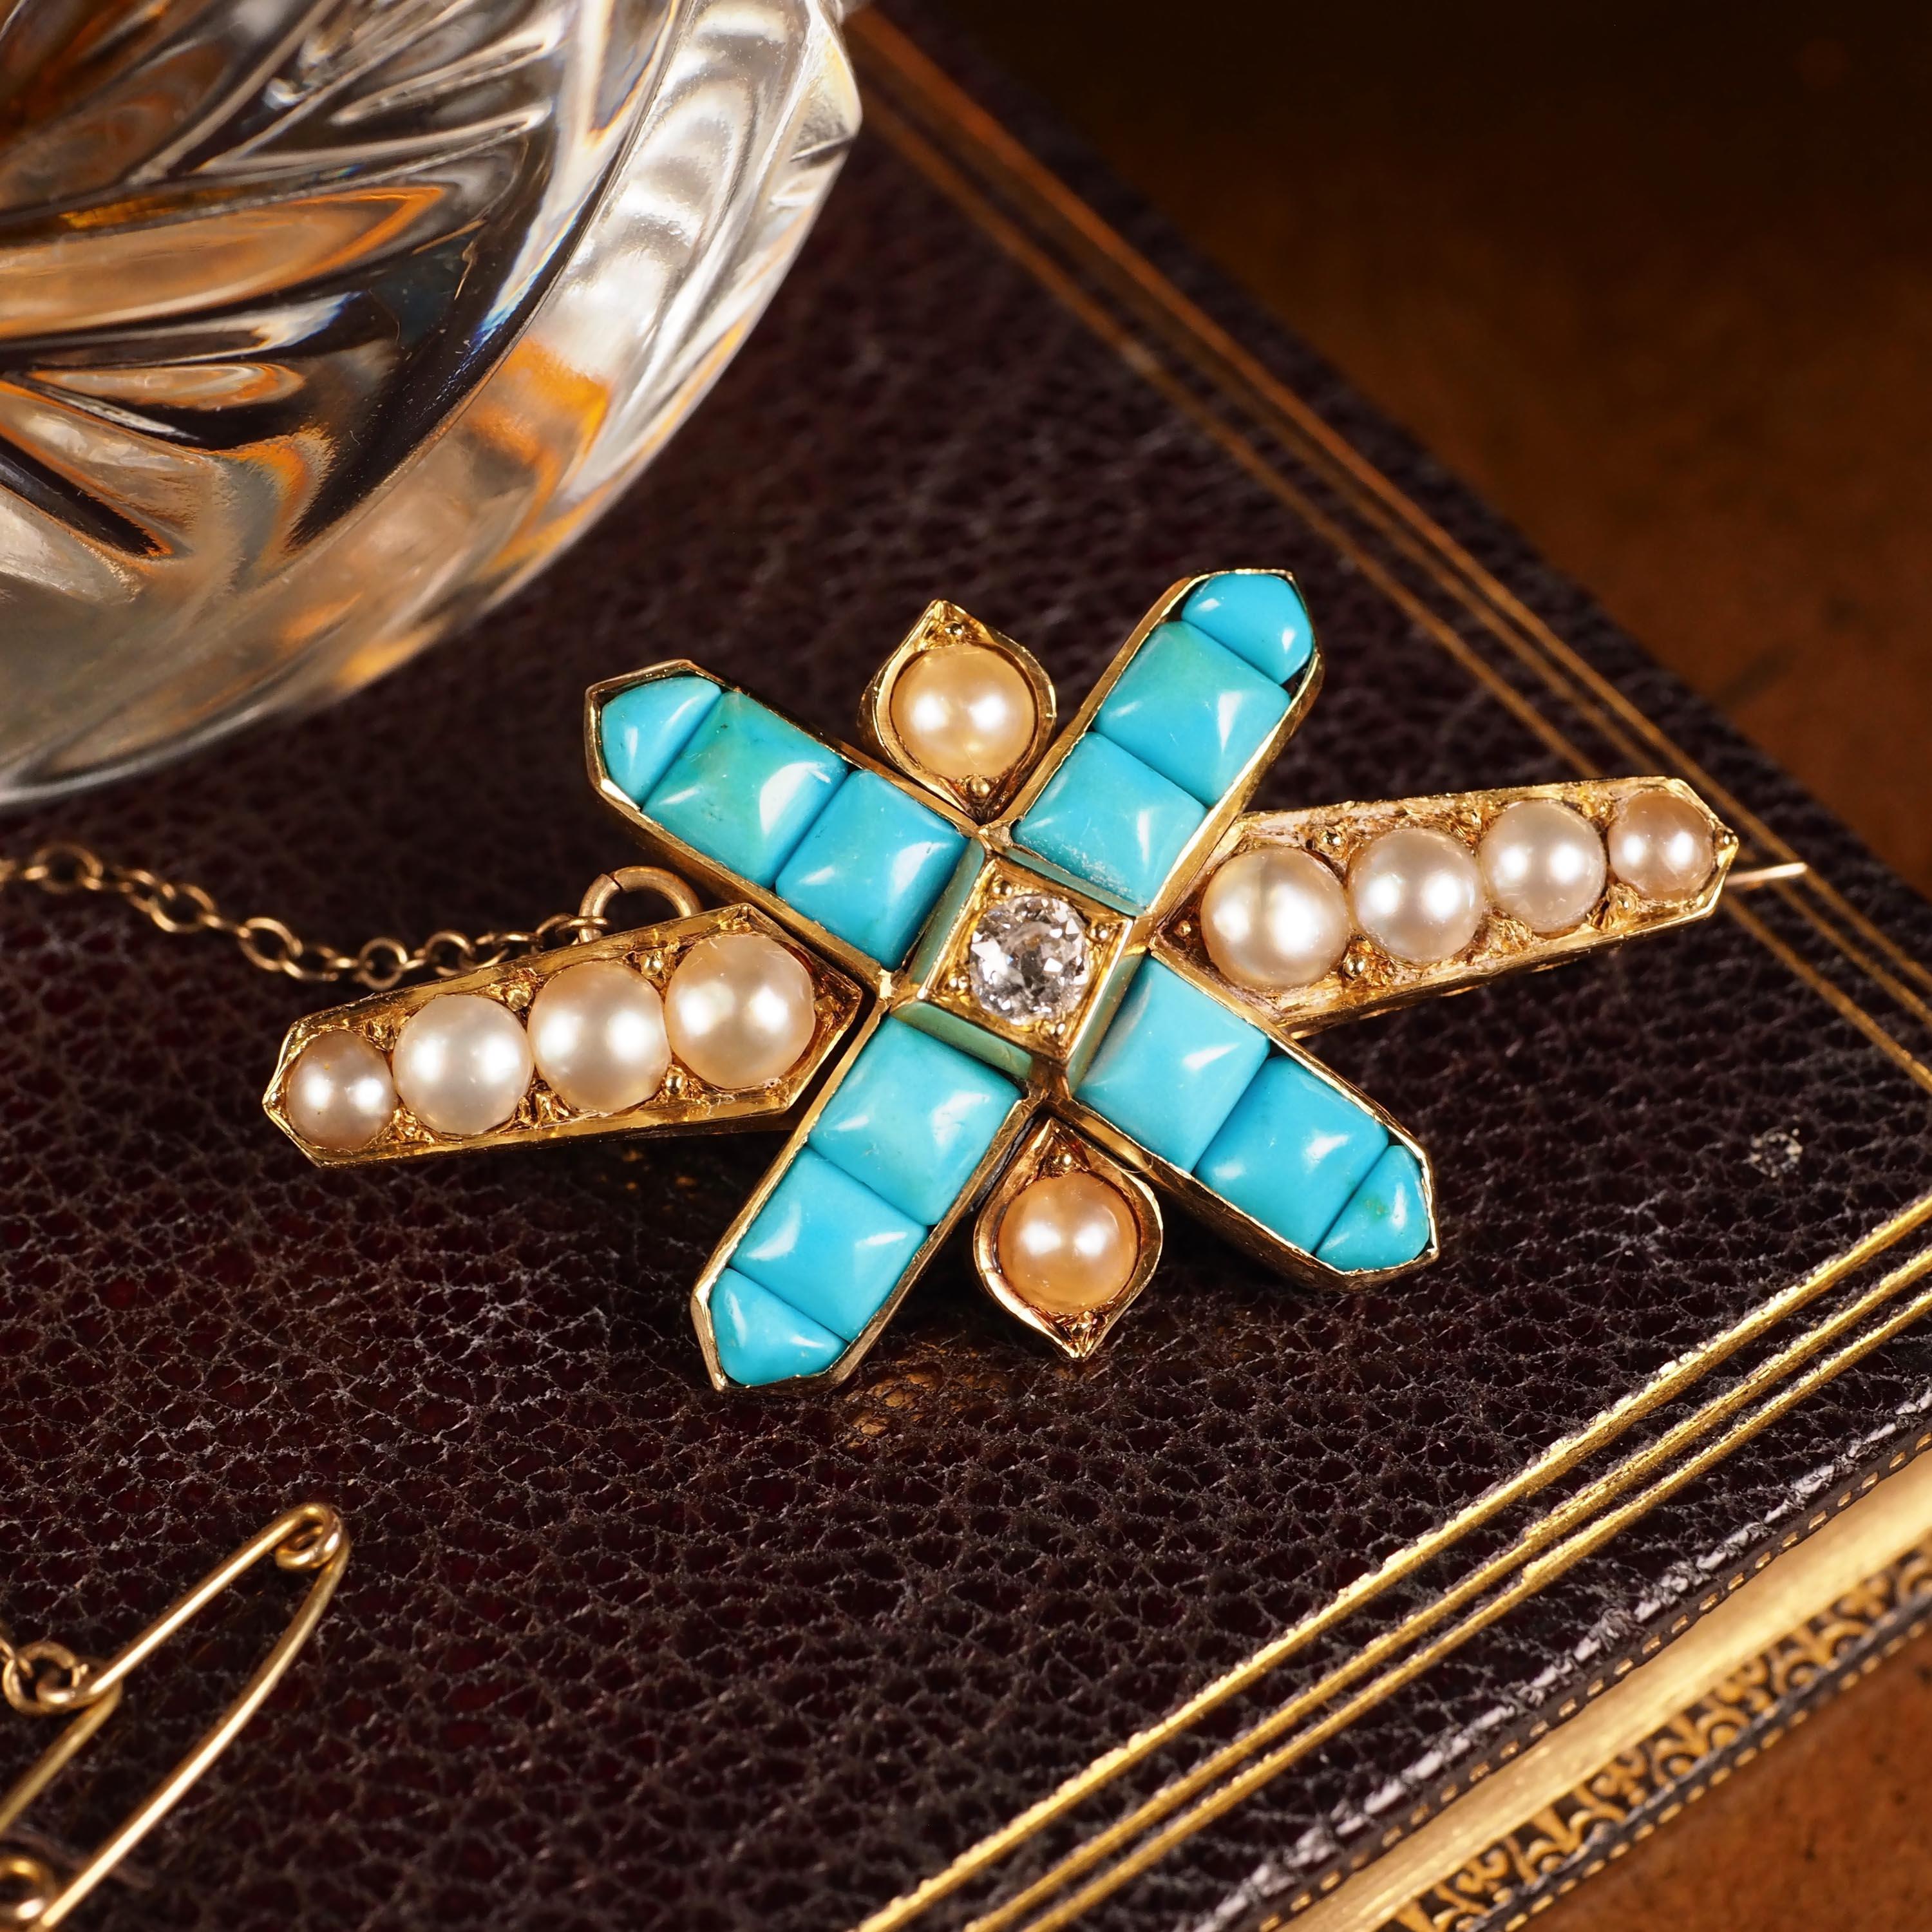 Antique Victorian 14k Gold Turquoise, Pearl & Diamond Brooch, circa 1880 In Good Condition For Sale In London, GB